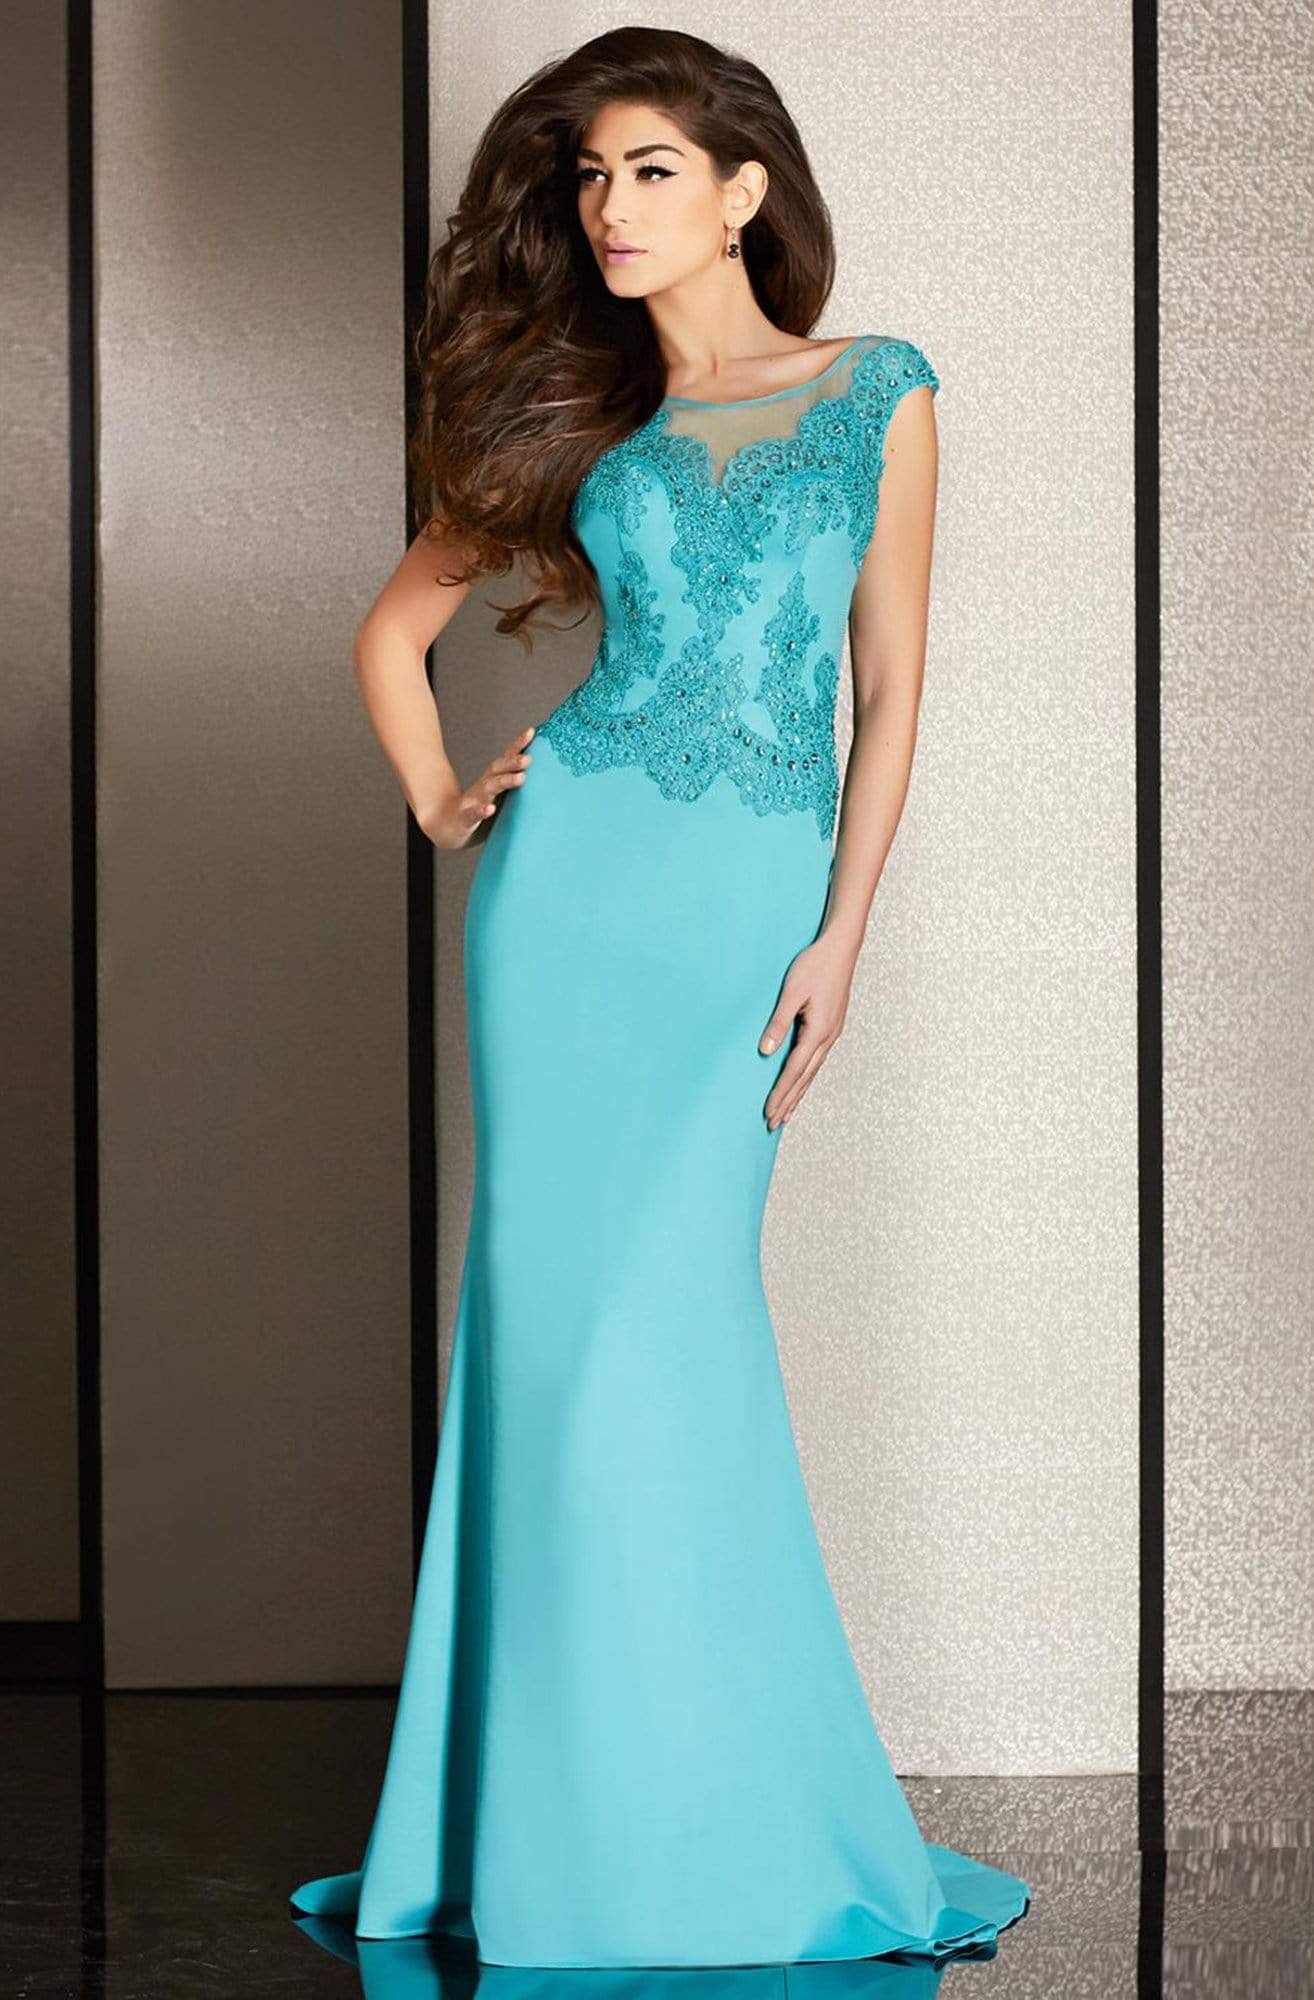 Clarisse - M6234 Applique Embellished Evening Gown Special Occasion Dress